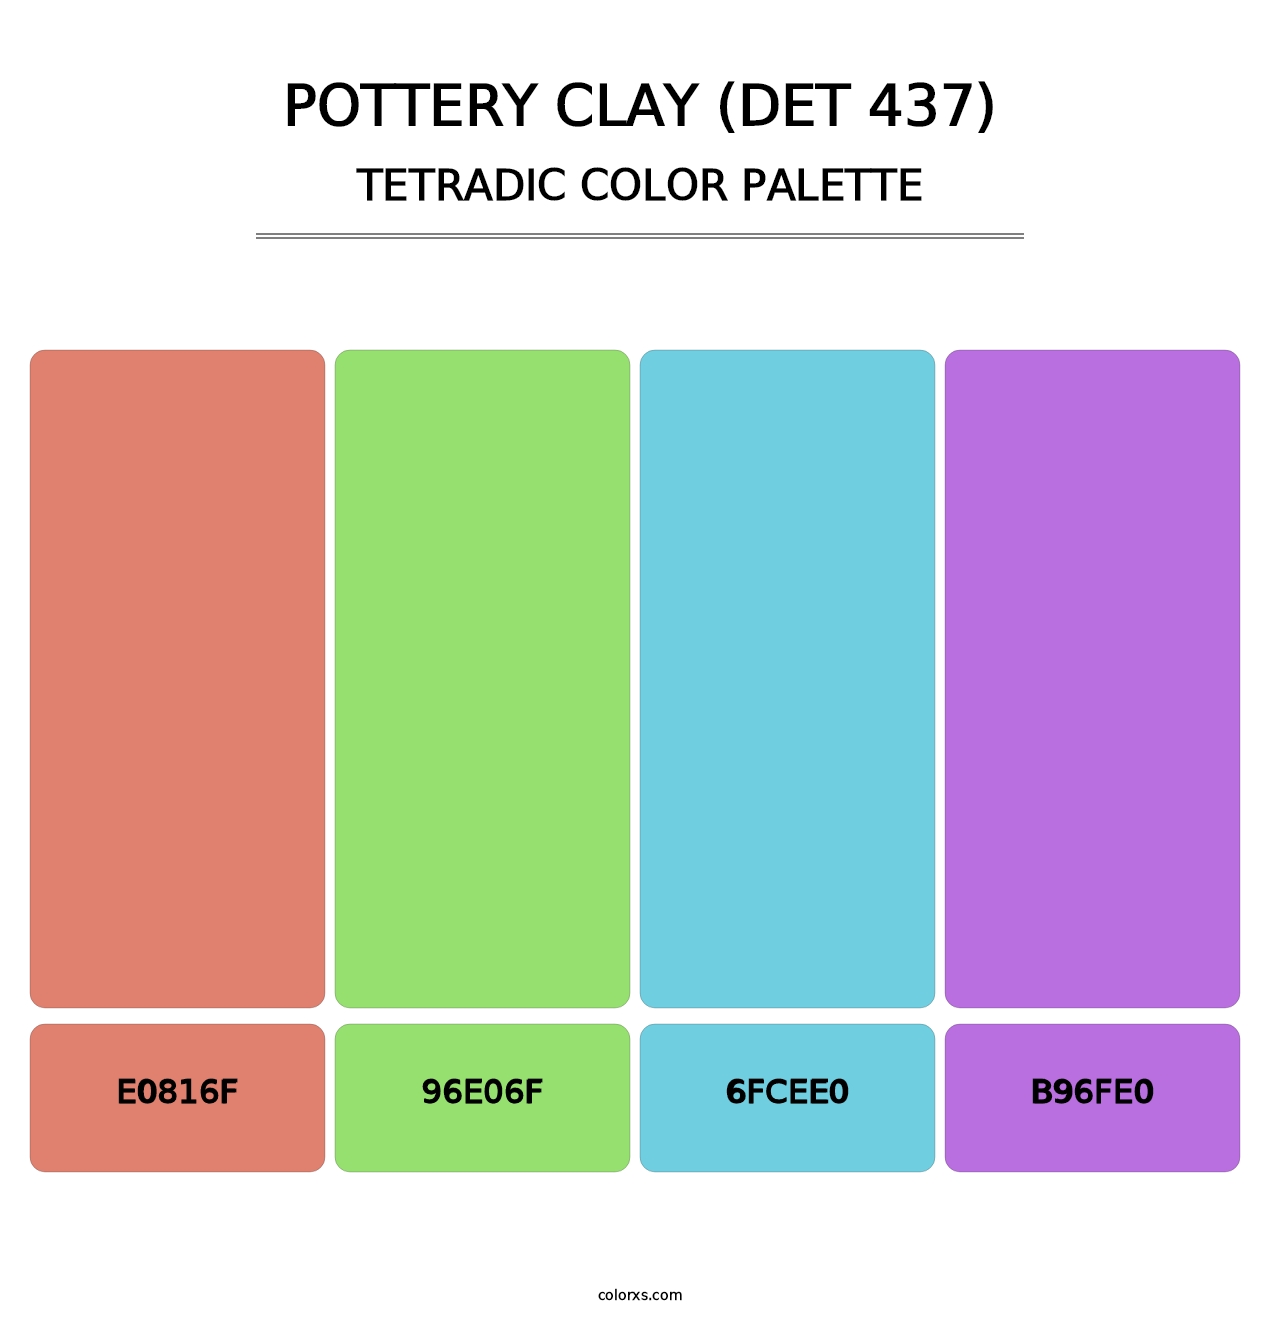 Pottery Clay (DET 437) - Tetradic Color Palette